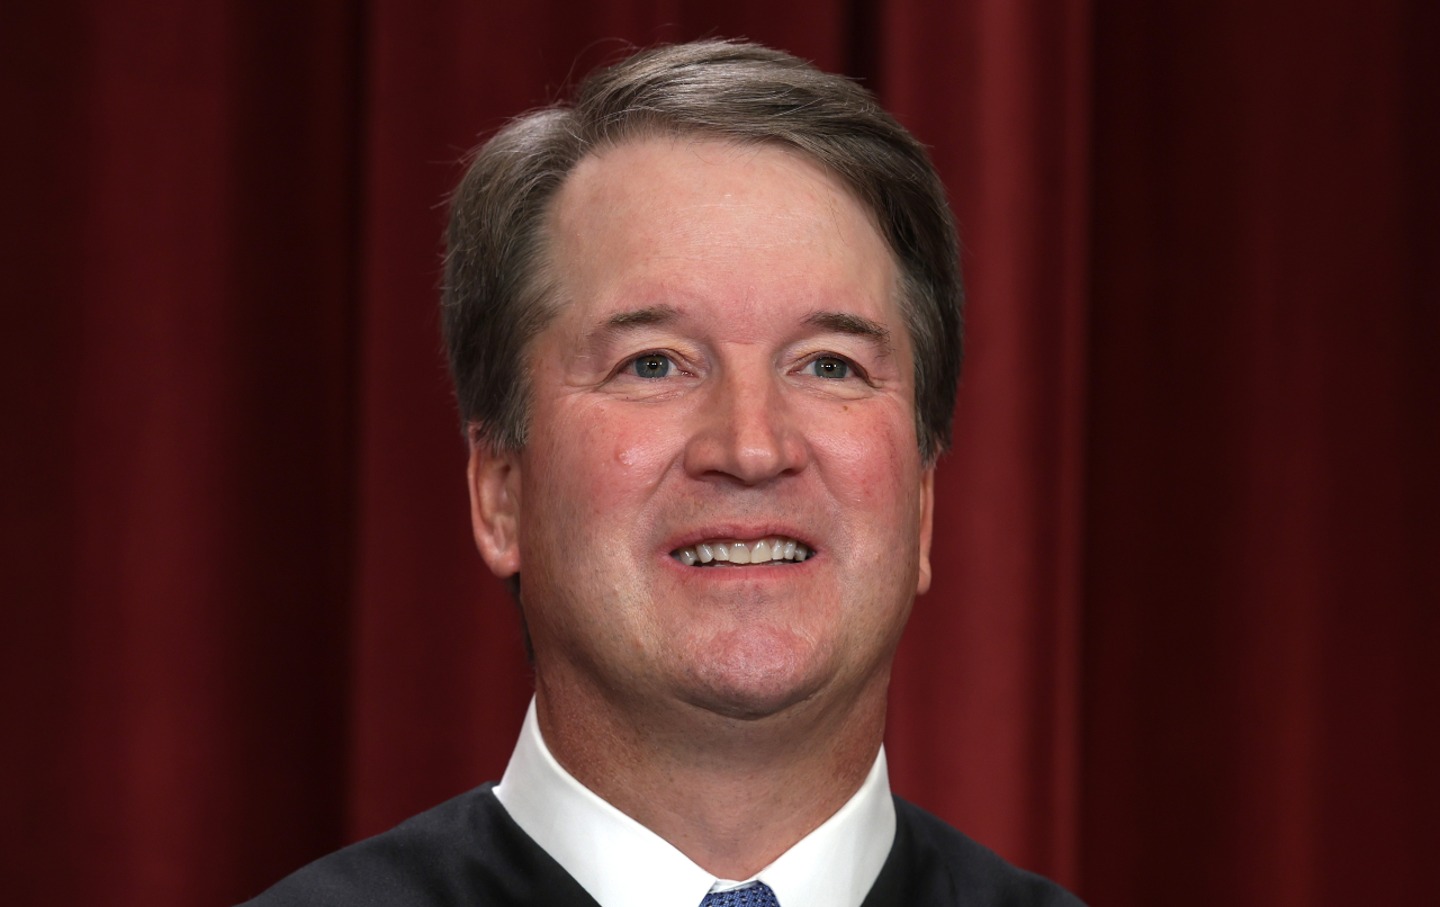 United States Supreme Court Justice Brett Kavanaugh poses for an official portrait at the Supreme Court building on October 7, 2022.